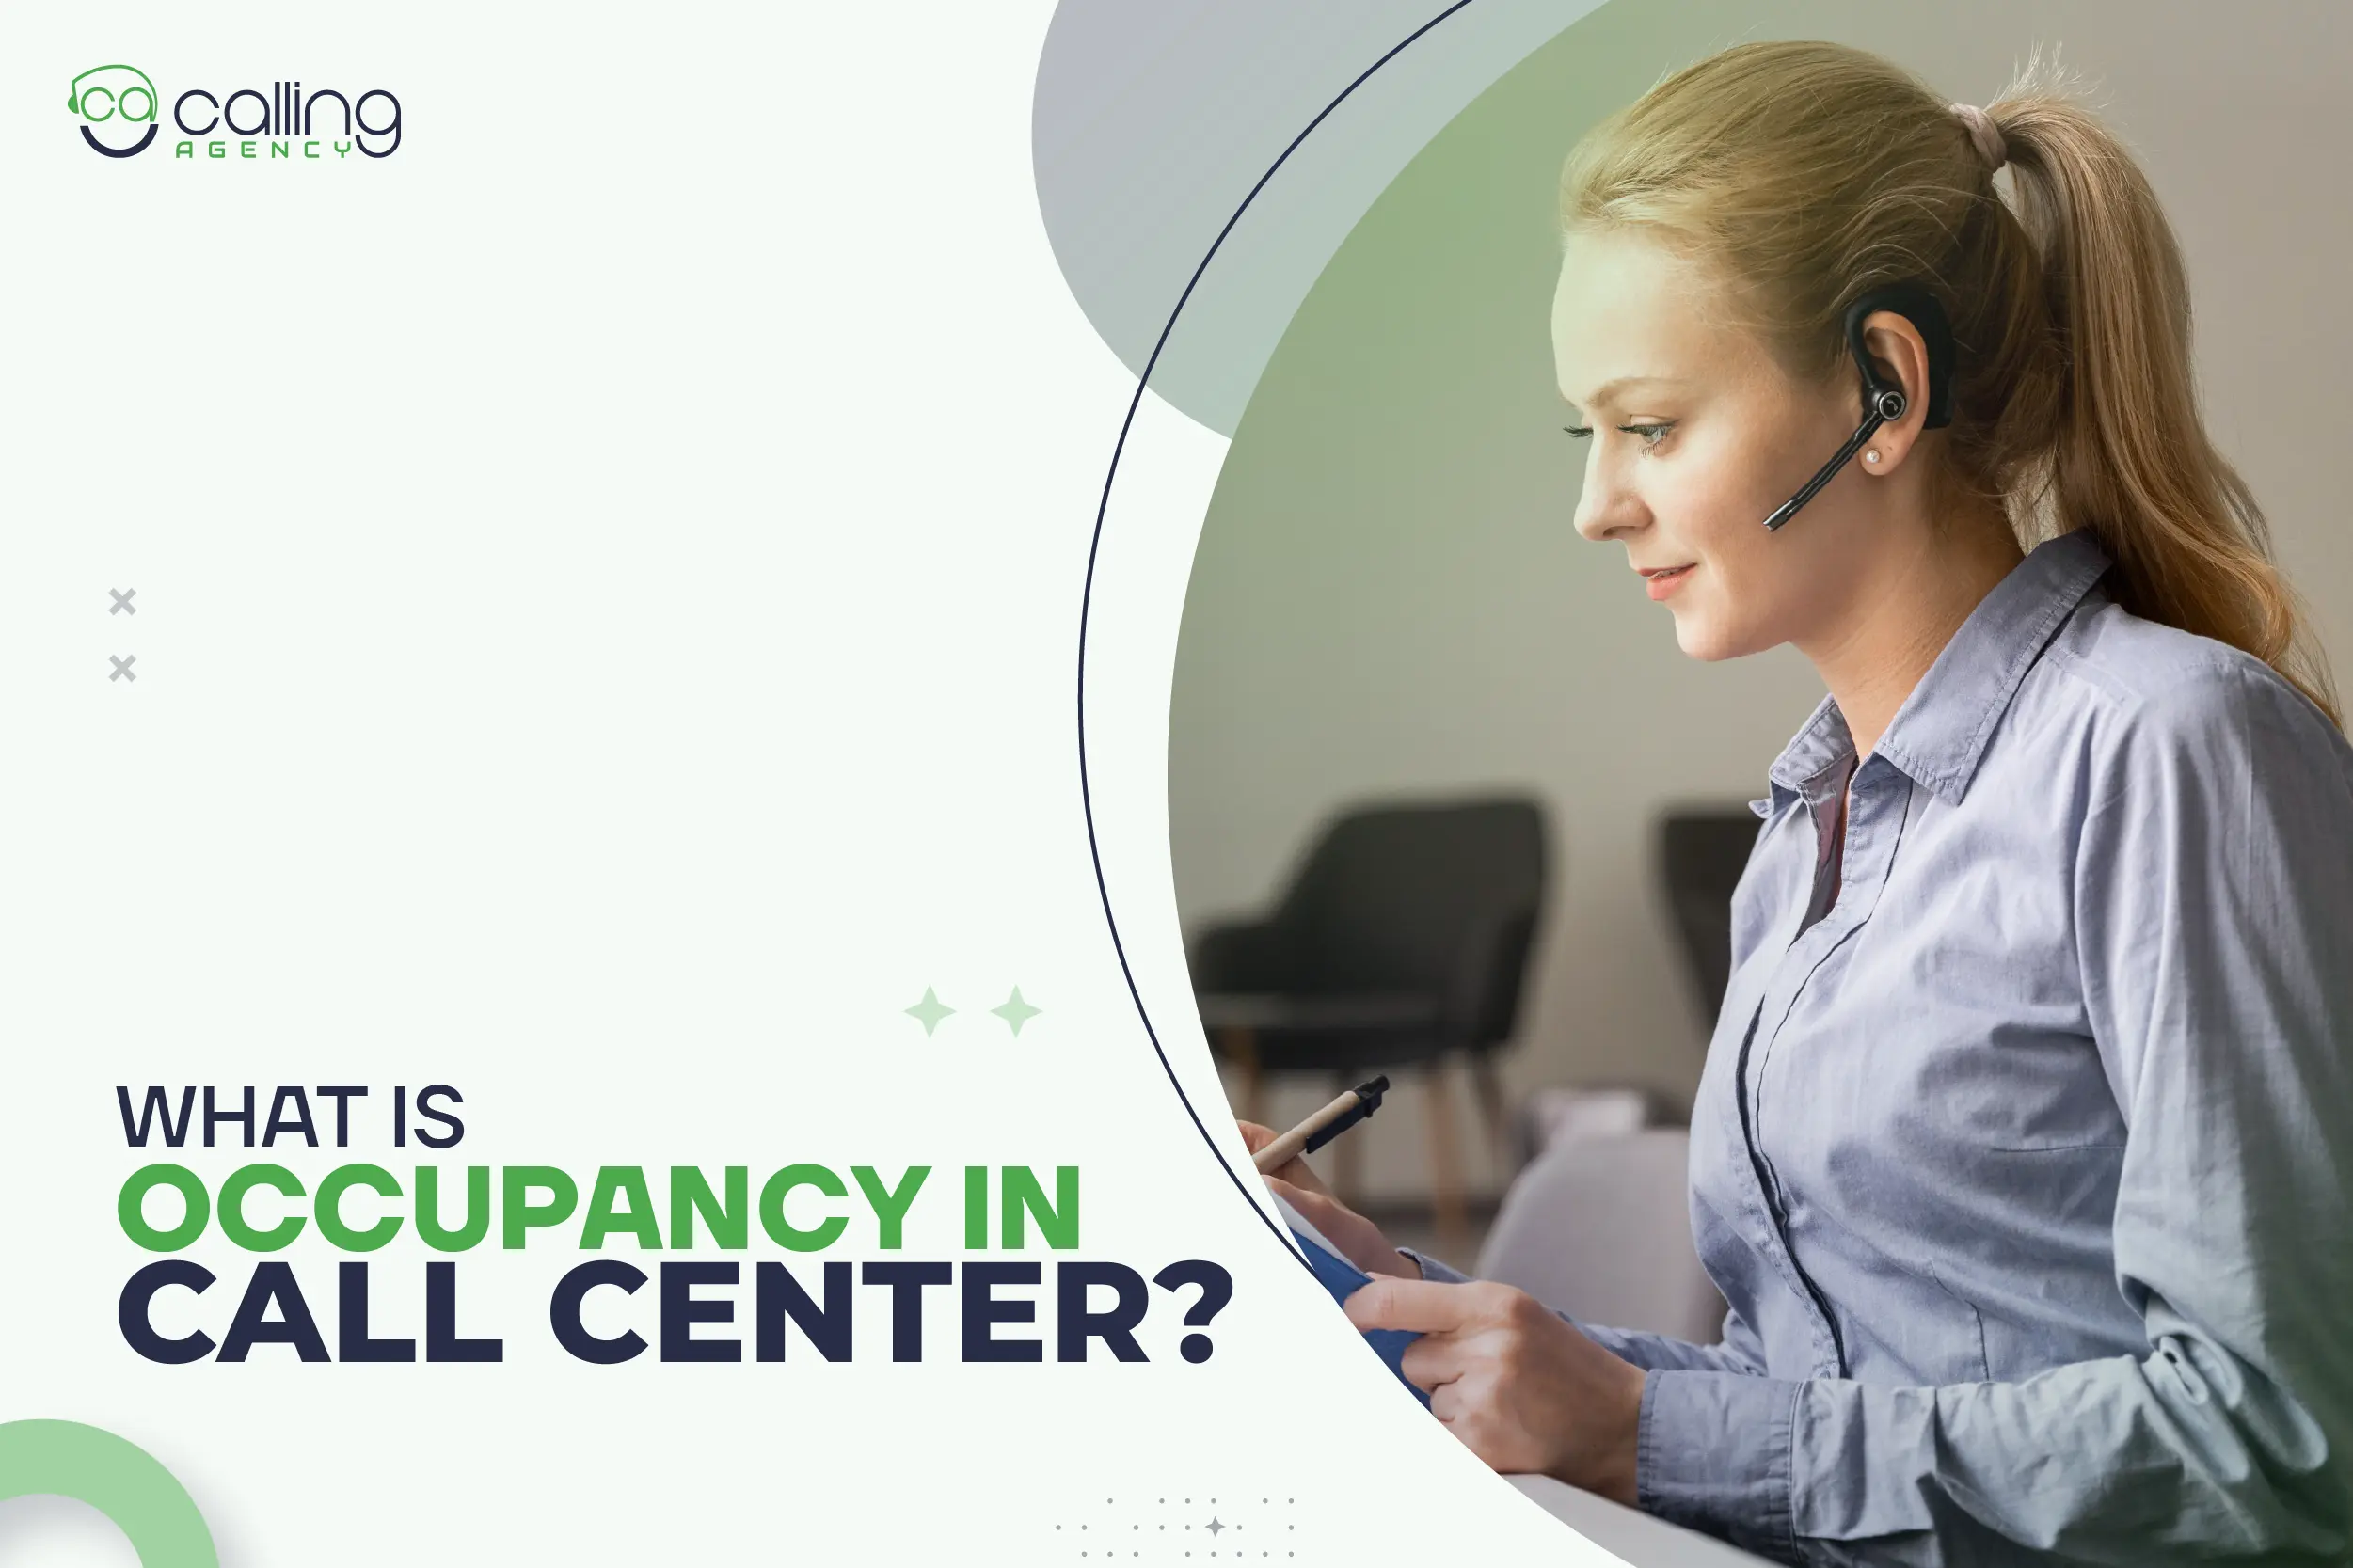 What Is Occupancy In Call Center?